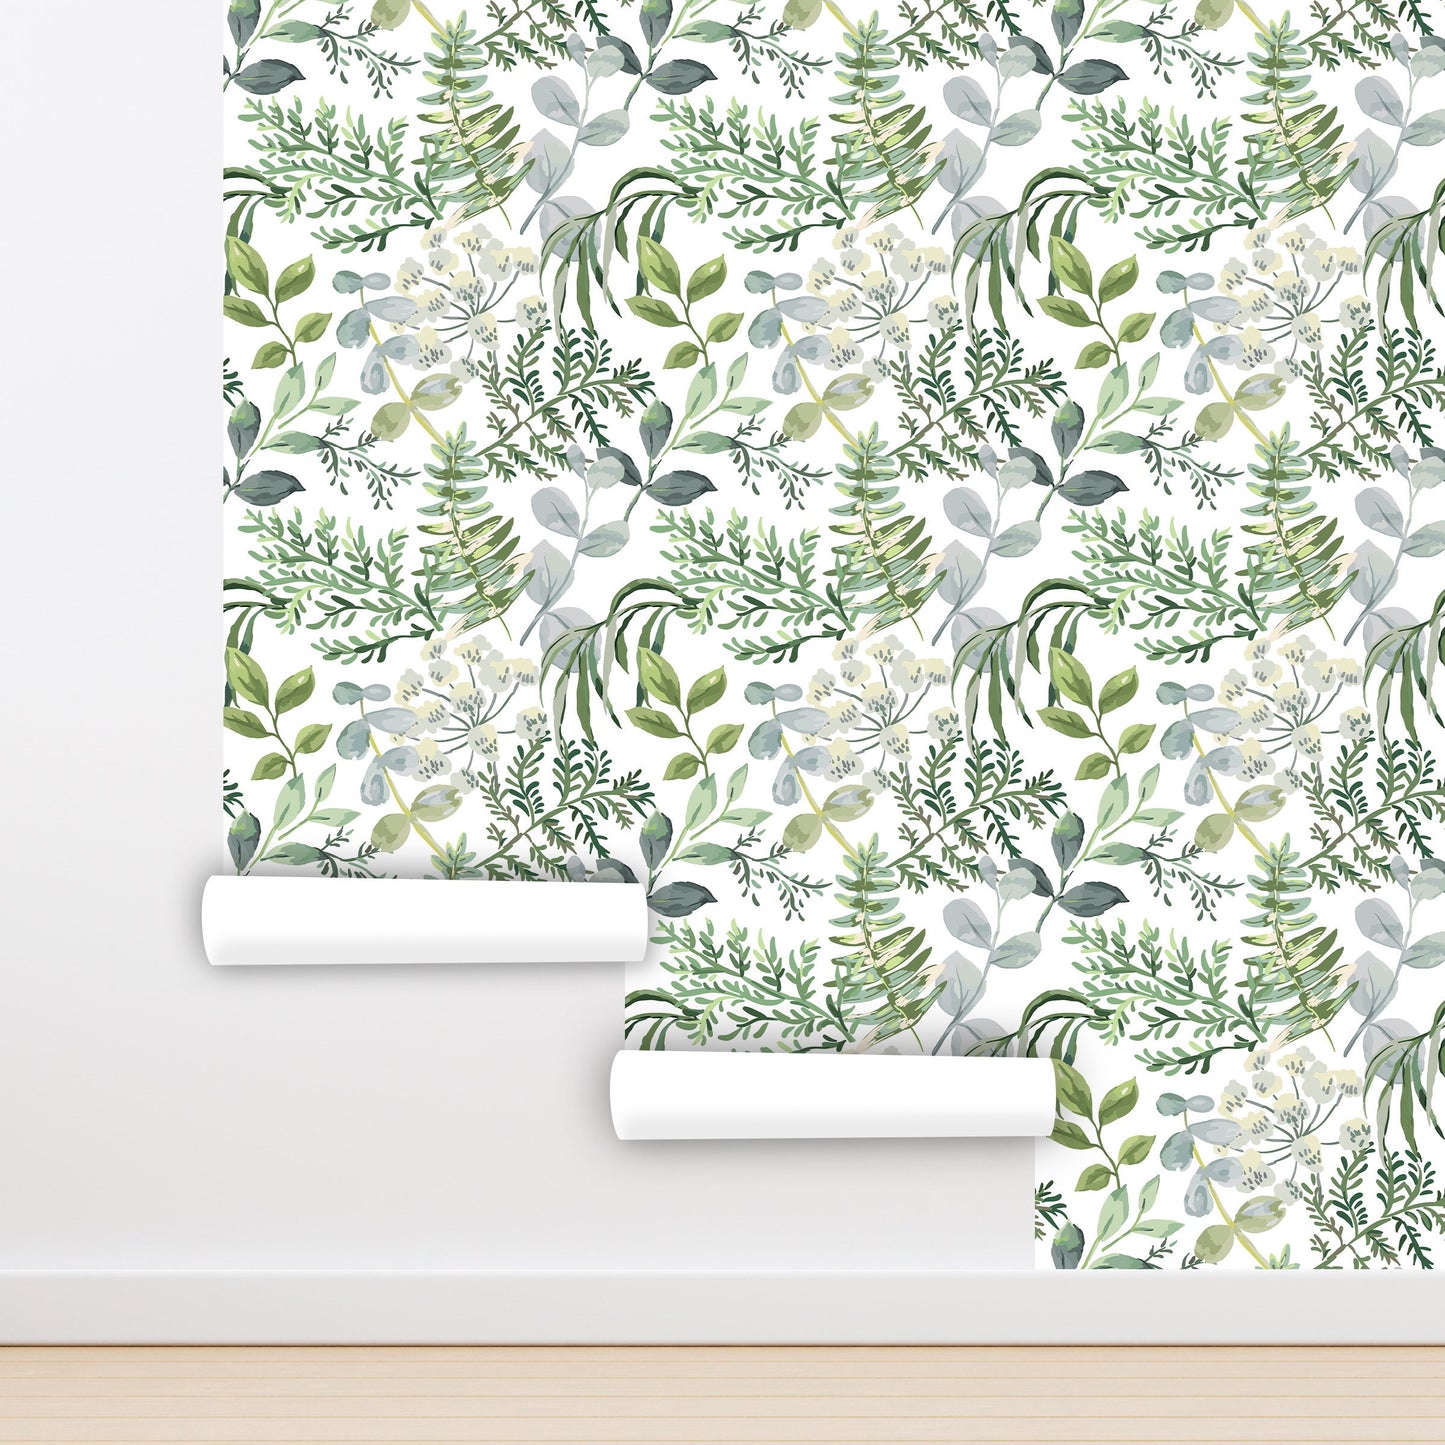 Fern Wallpaper, Watercolor Leaf Wallpaper Peel and Stick, Botanical Wallpaper, Removable Wall Paper